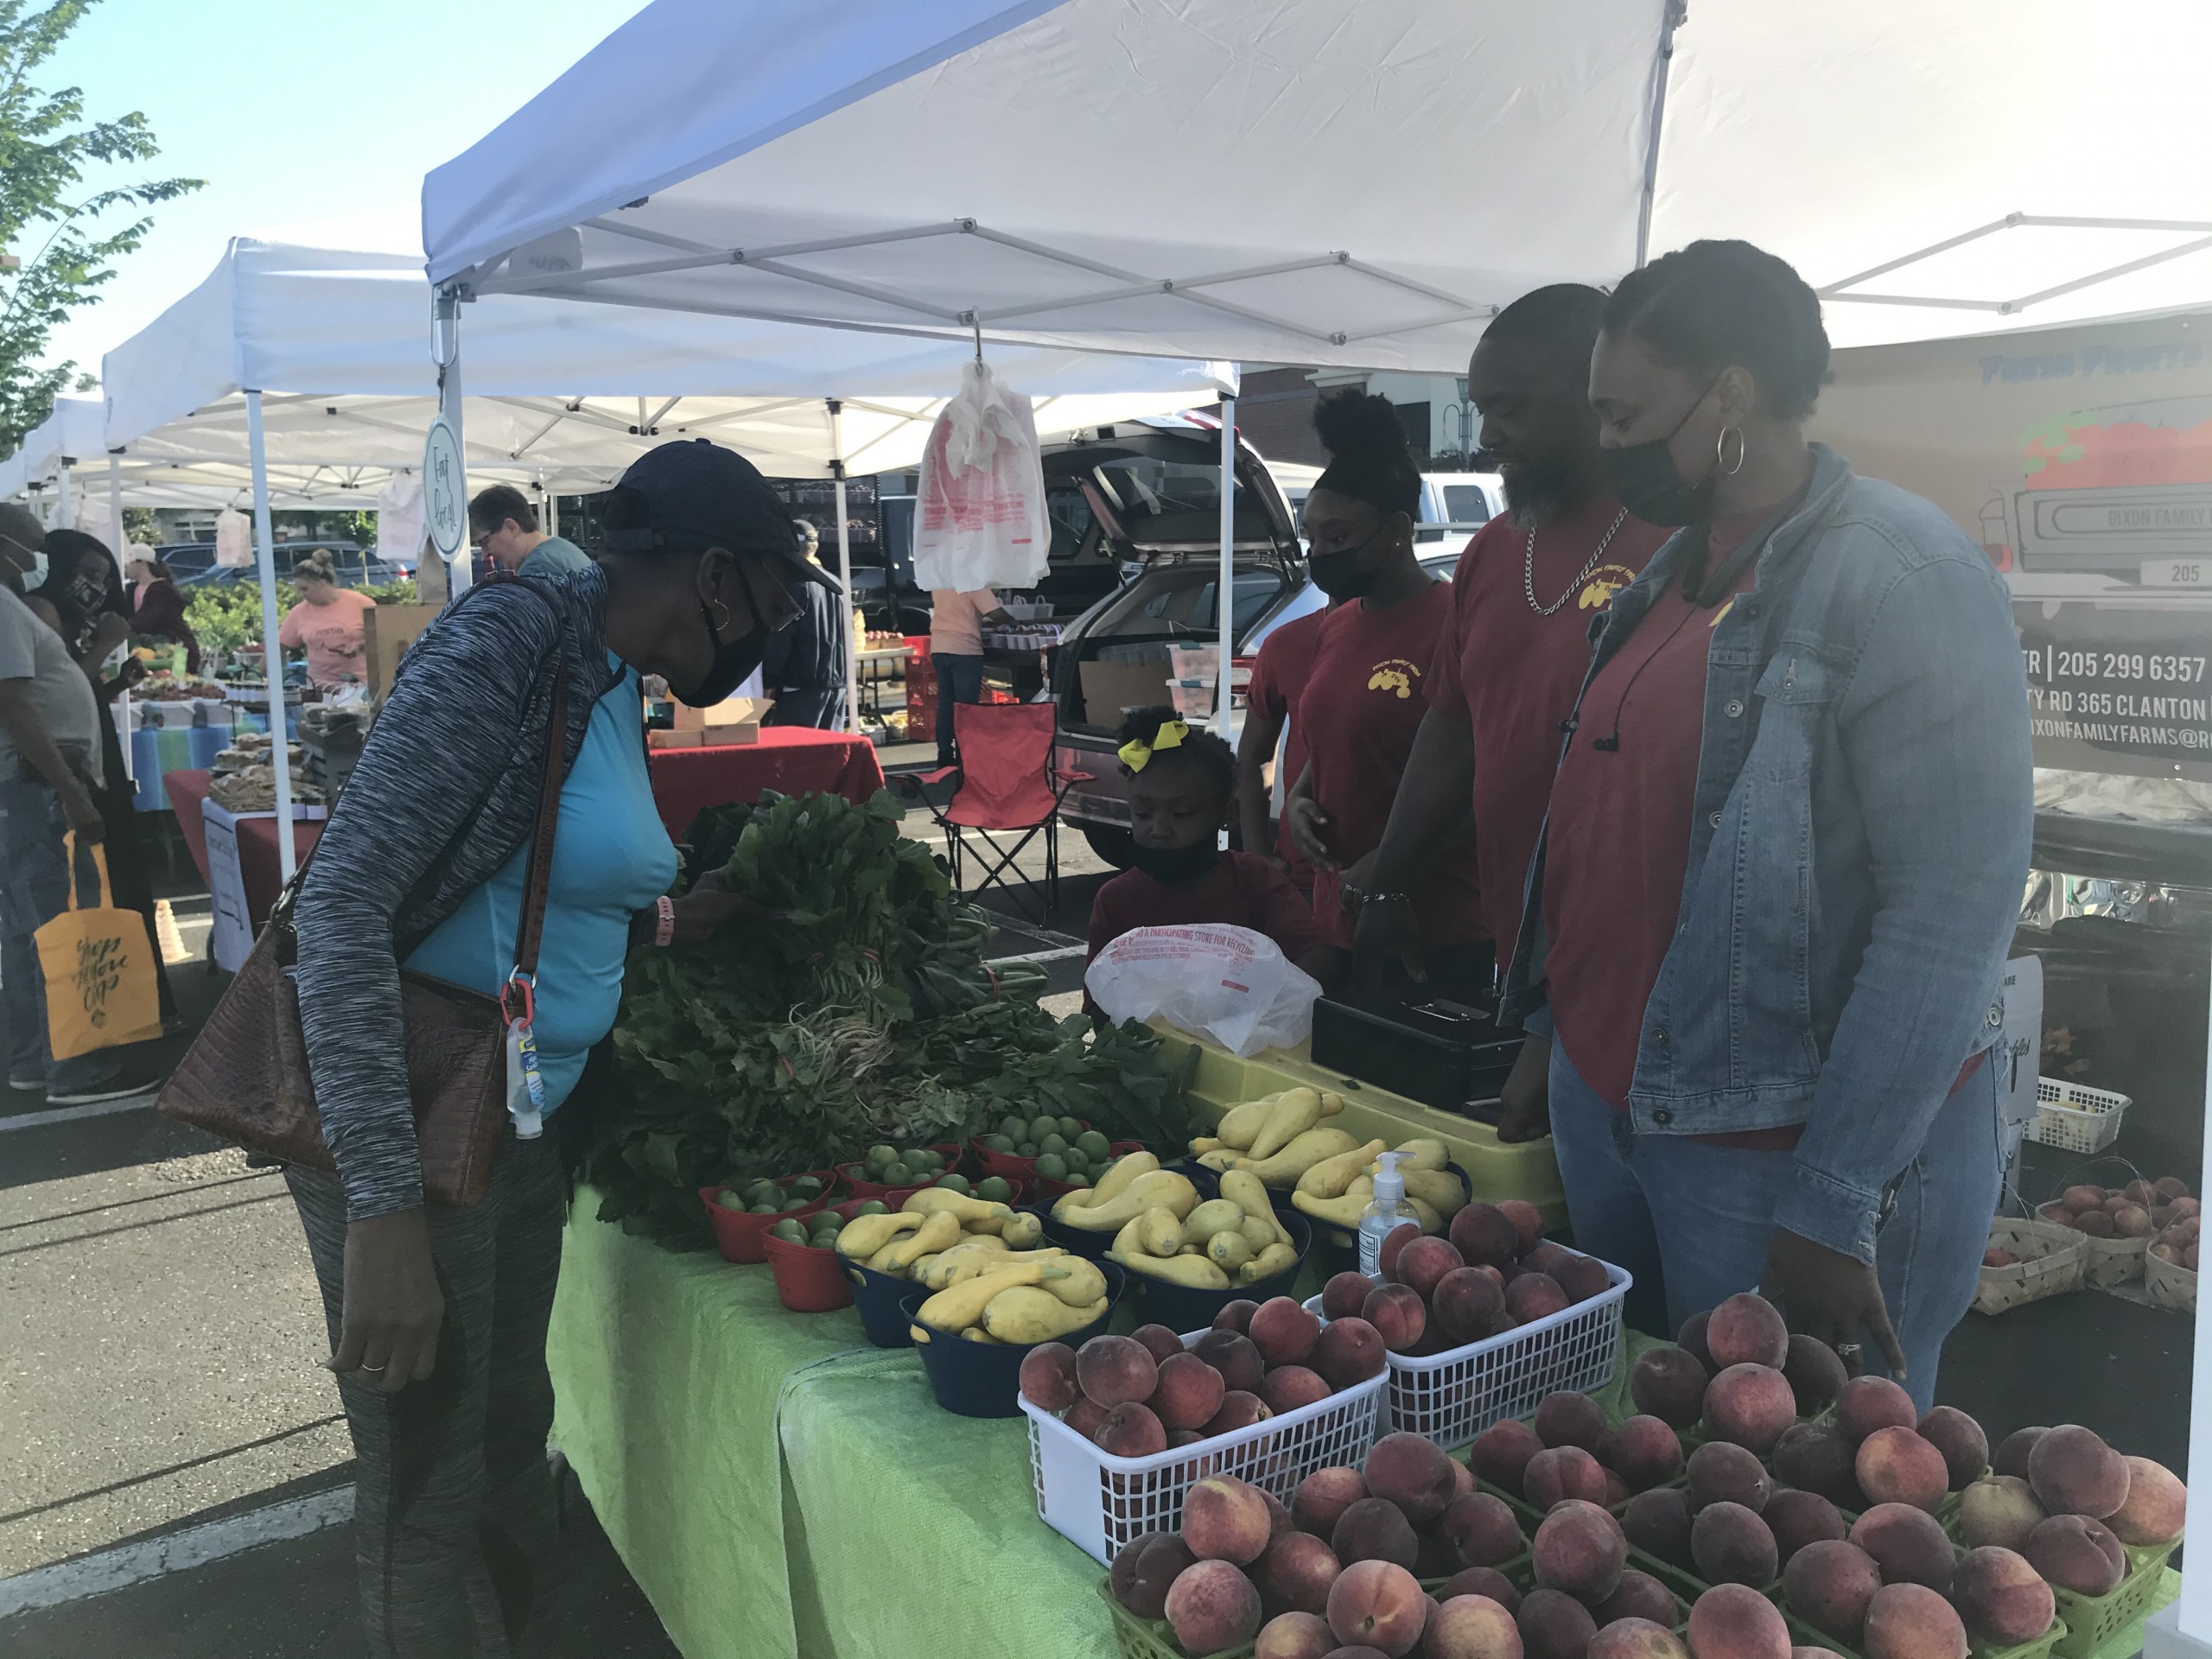 PHOTO GALLERY: Farmers Market at the Shoppes at EastChase